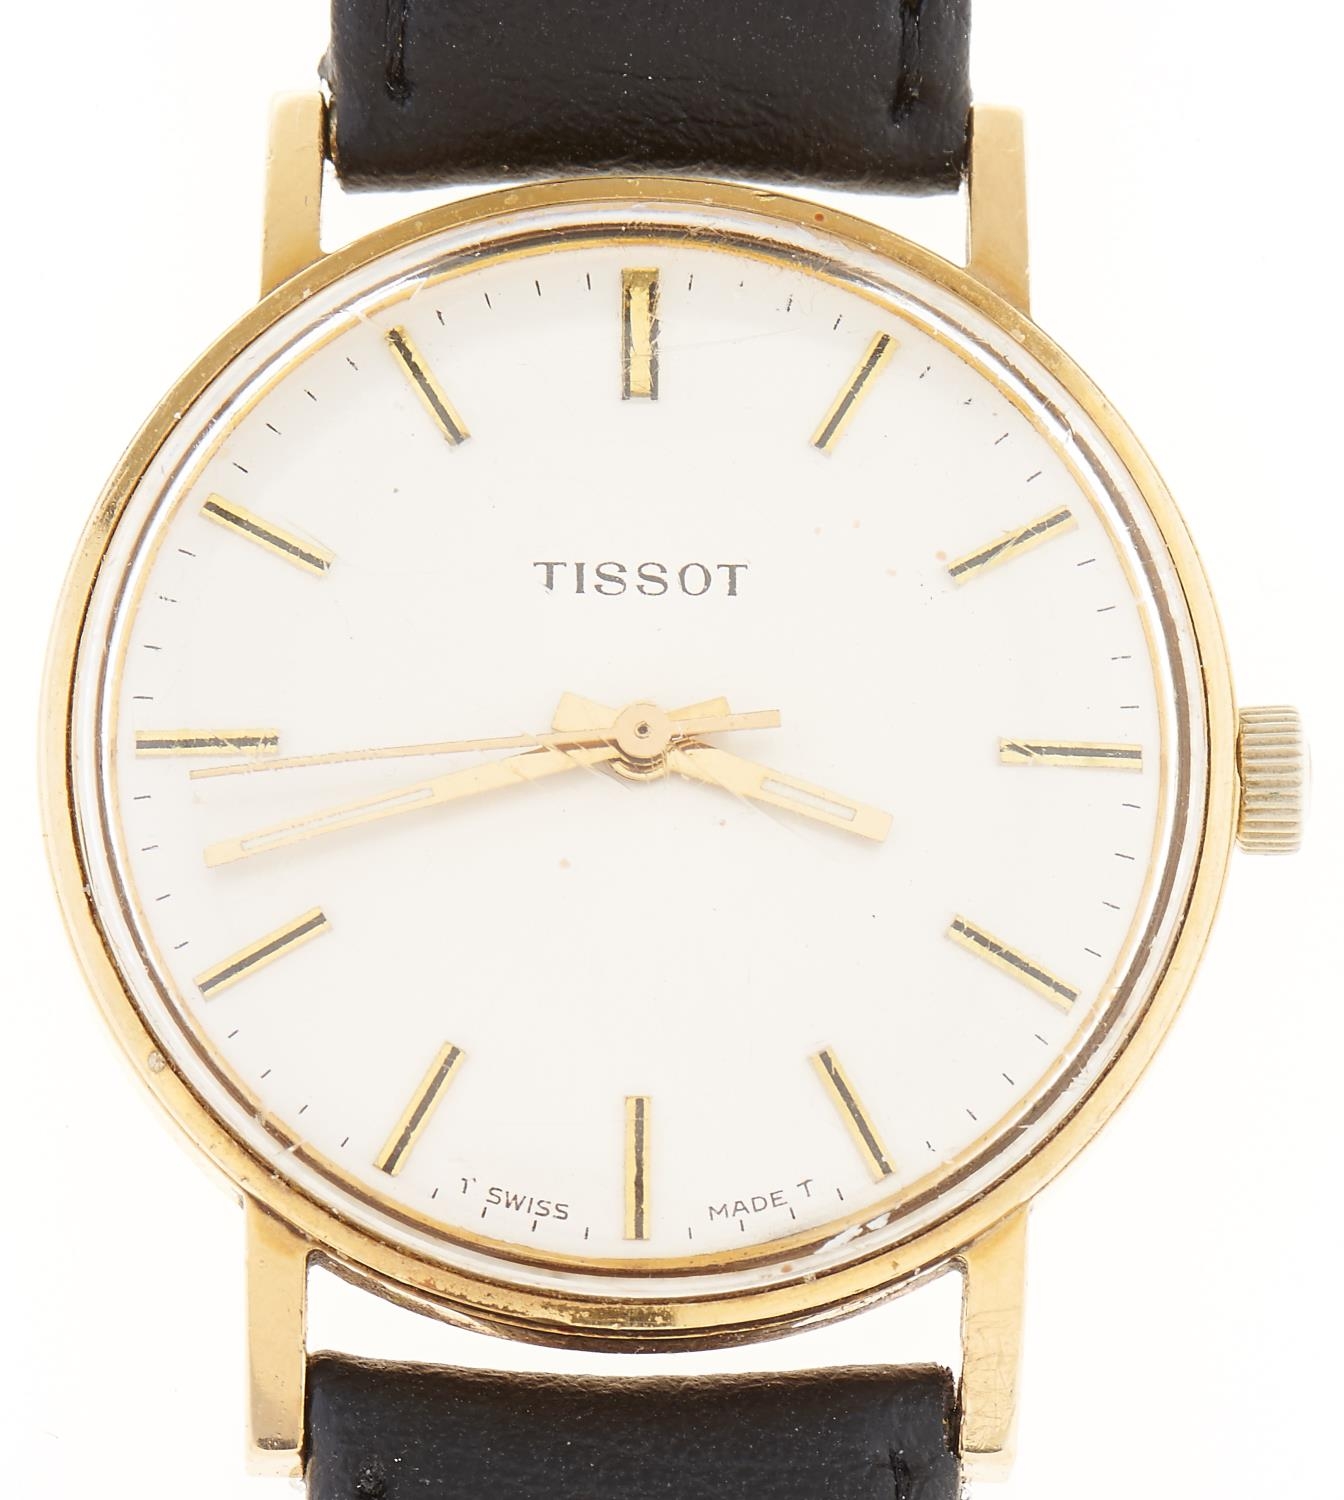 A Tissot gold plated gentleman's wristwatch, maker's box Apparently working order, wear and